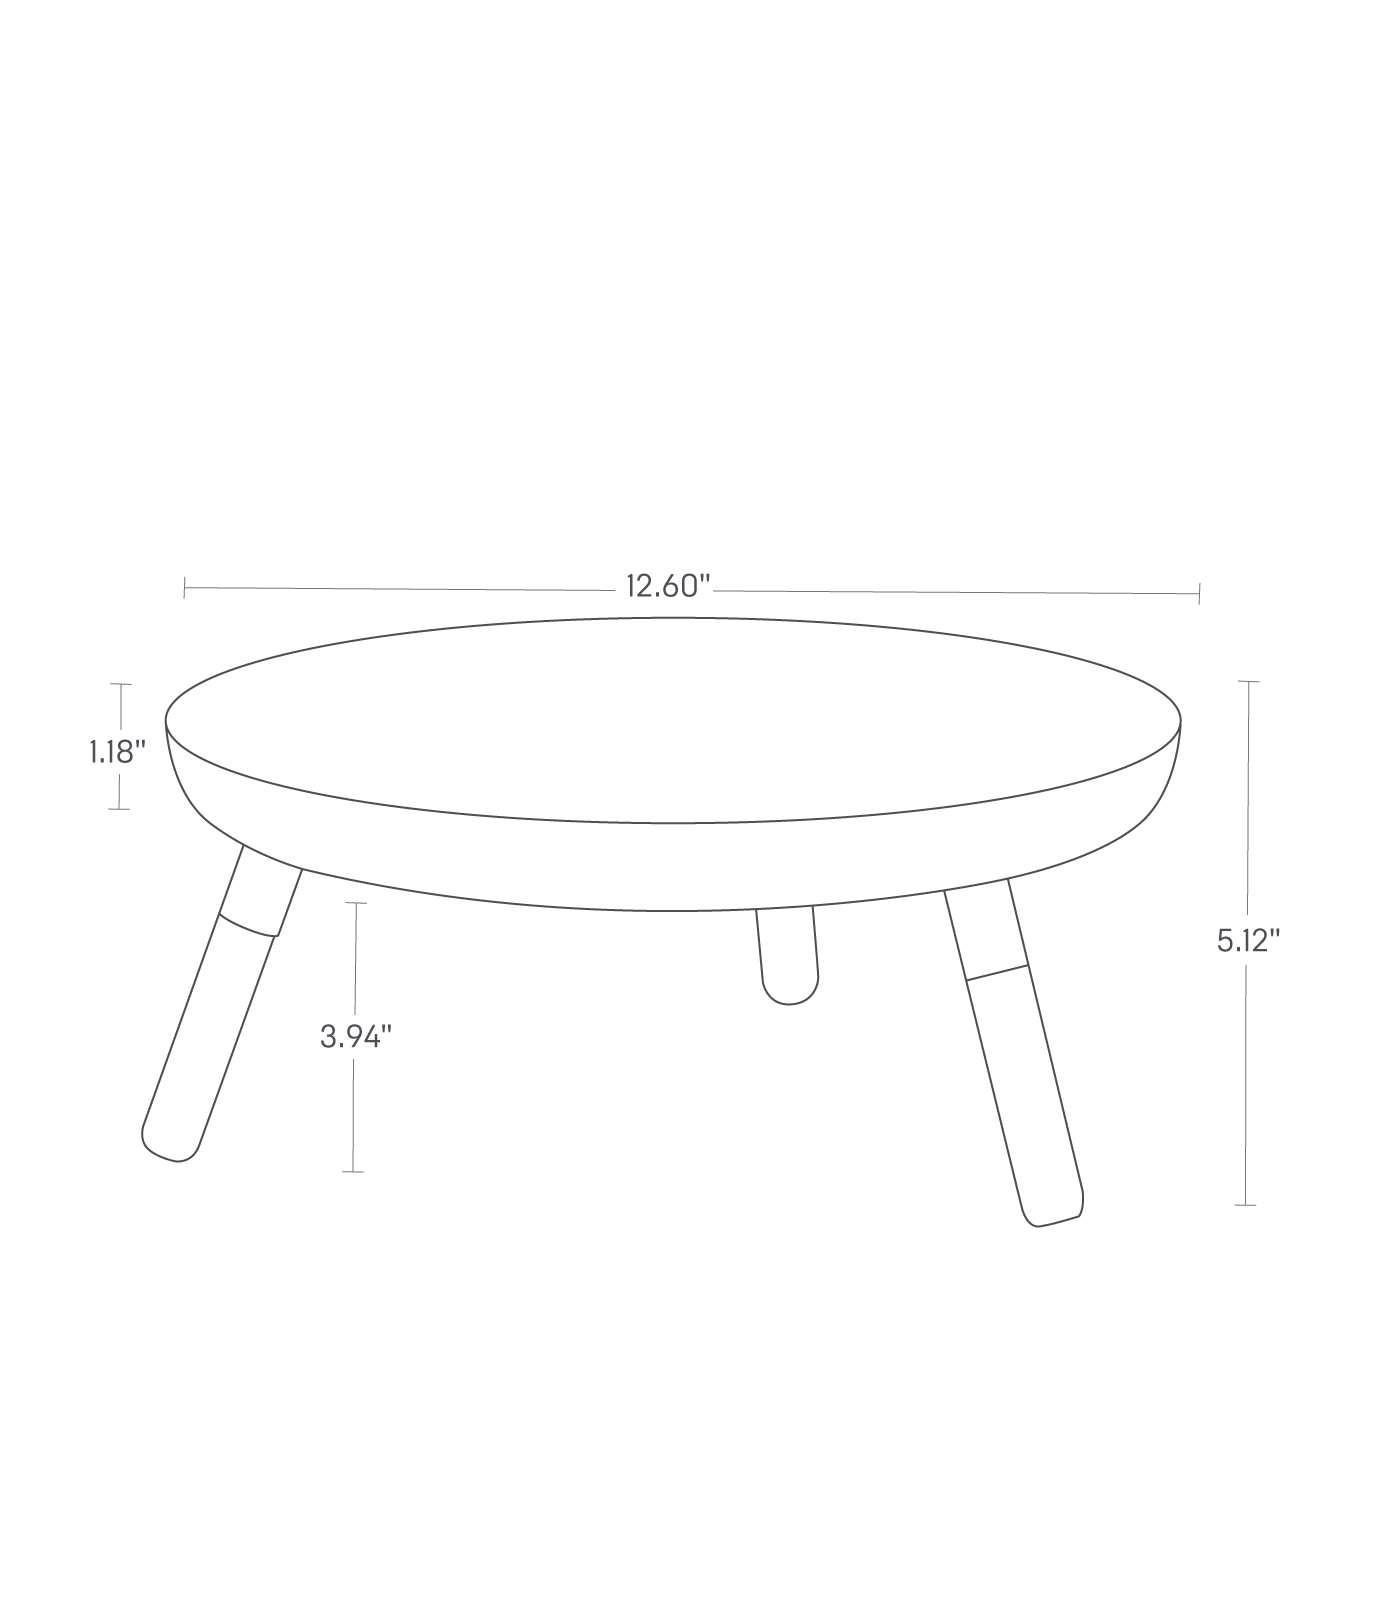 Dimension image for Countertop Pedestal Tray showing total height of 5.12